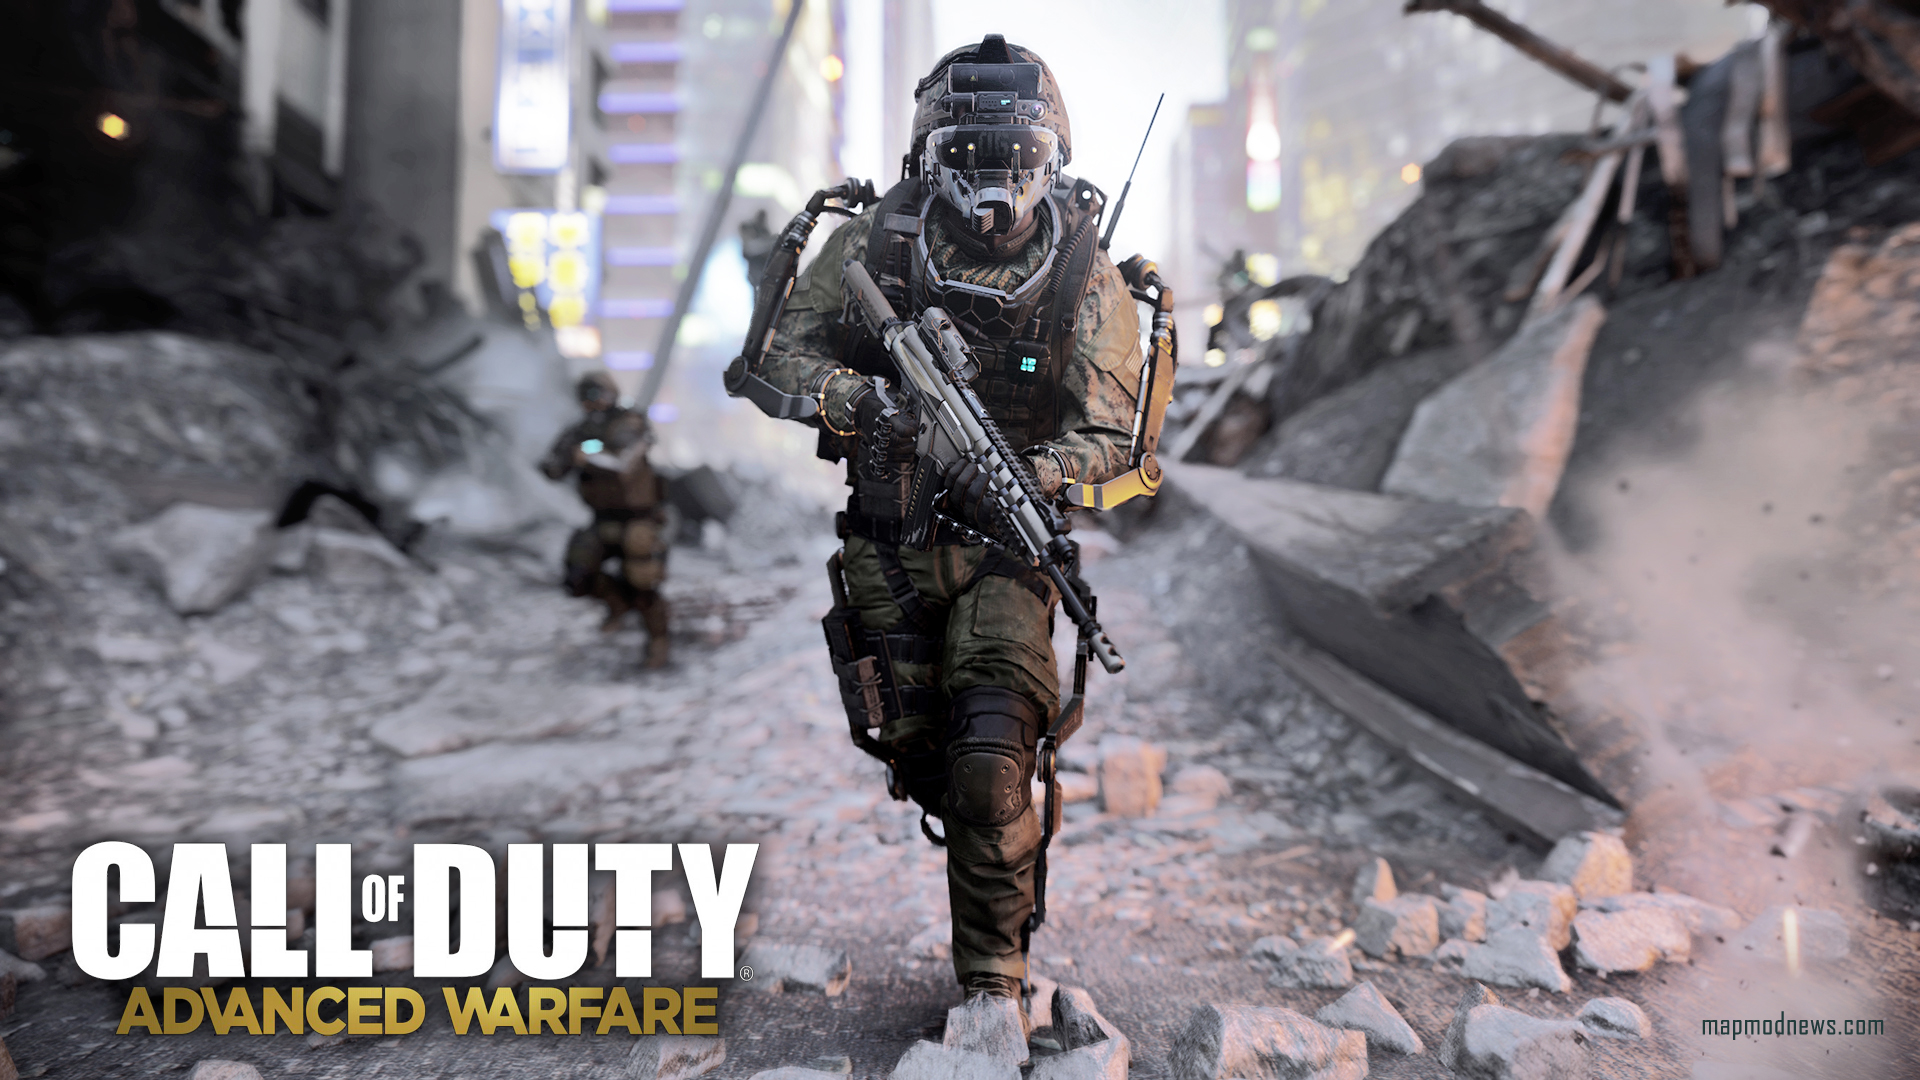 call of duty advanced warfare wallpaper,action adventure game,soldier,shooter game,games,army